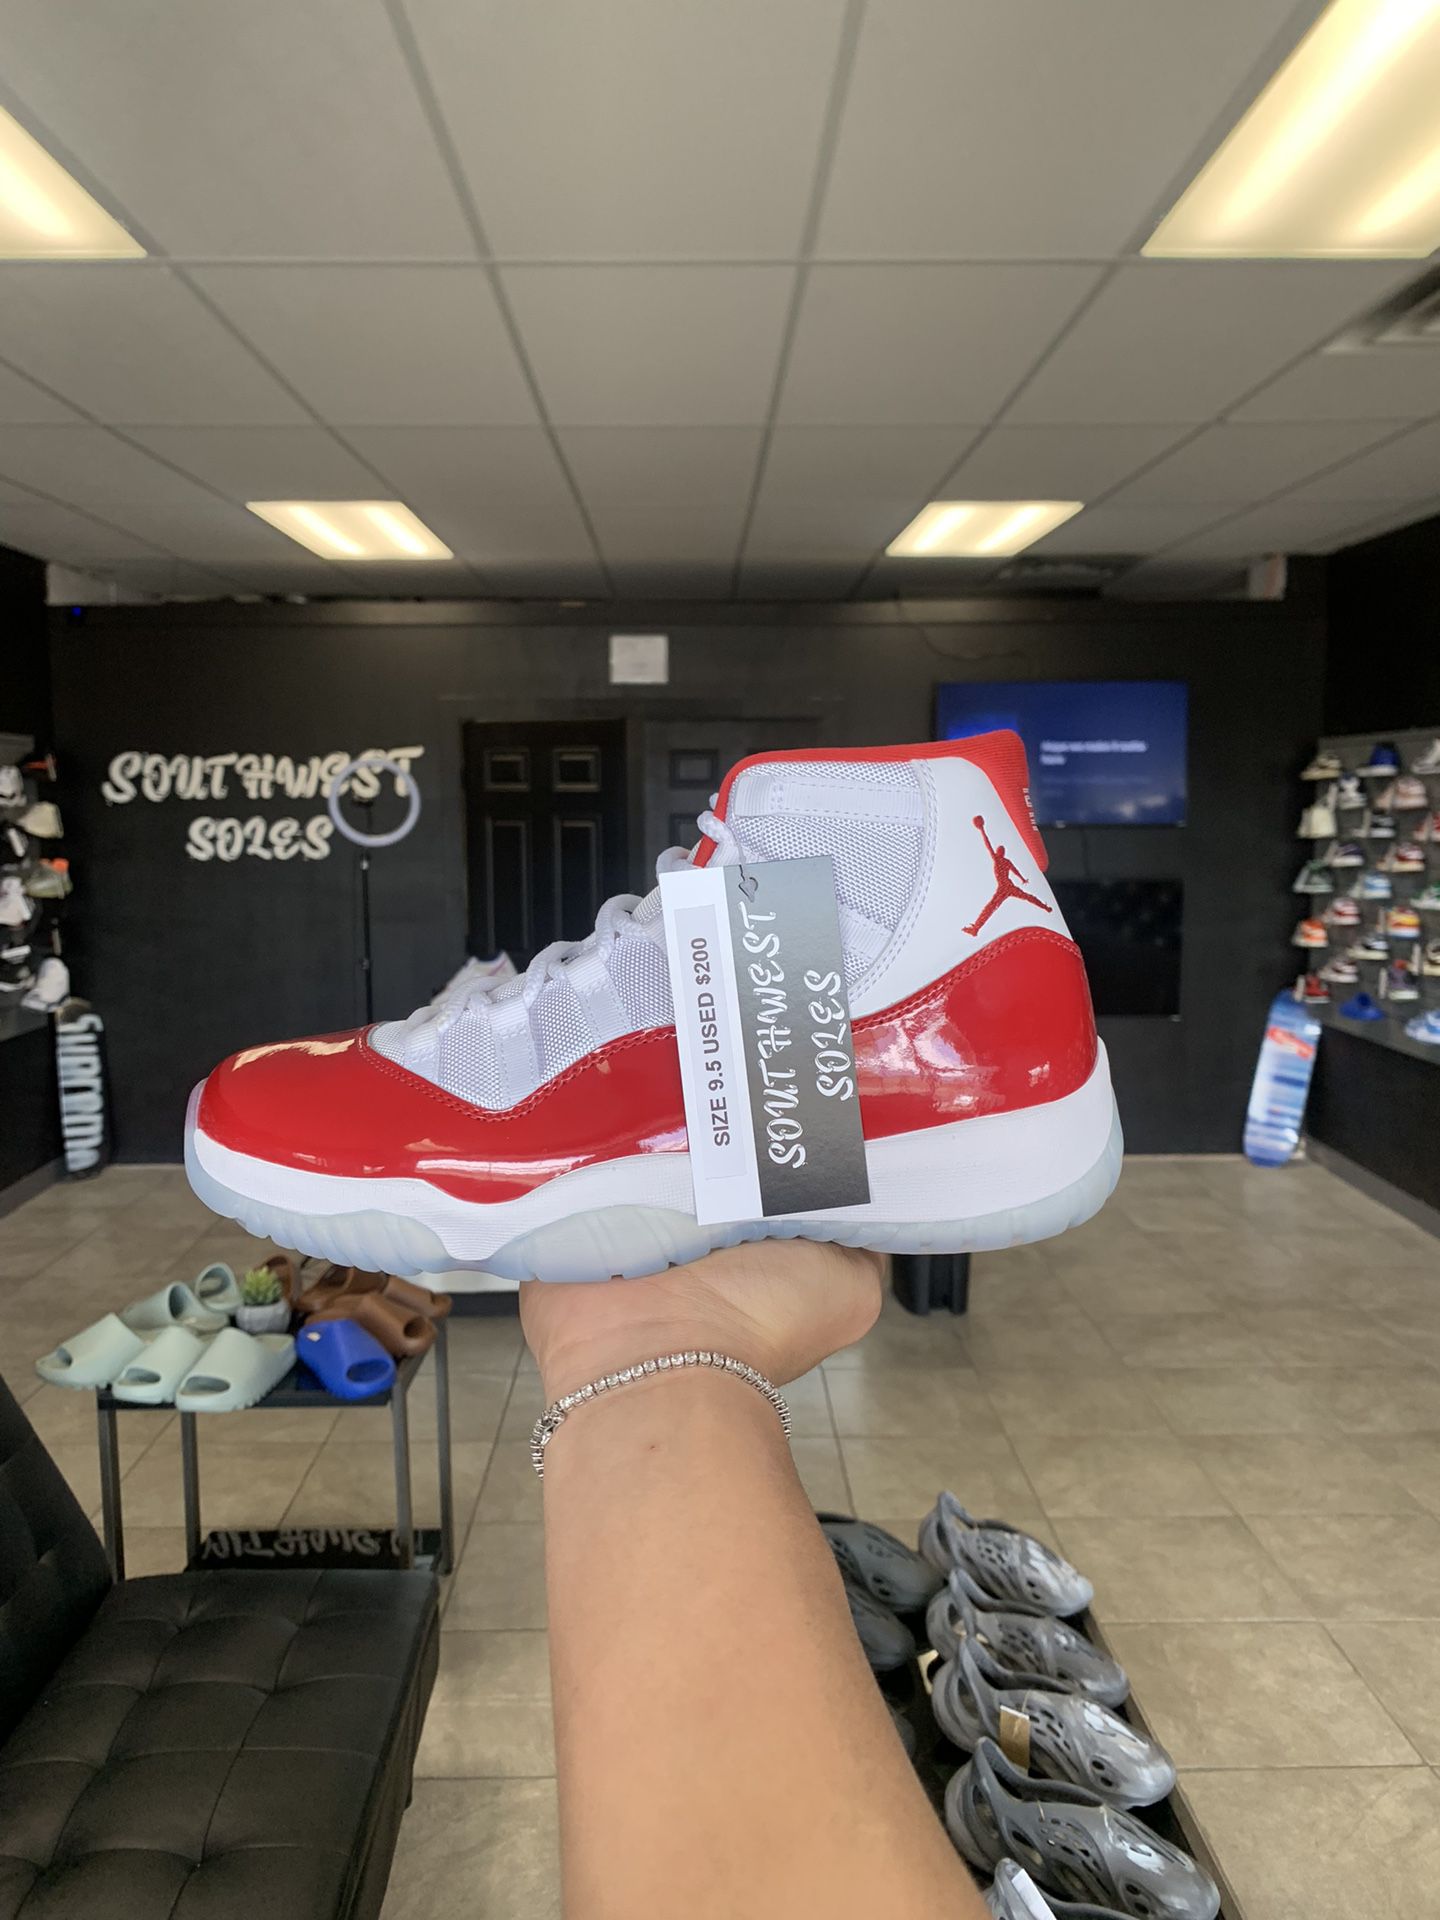 Jordan 11 Cherry Size 9.5 Available In Store!